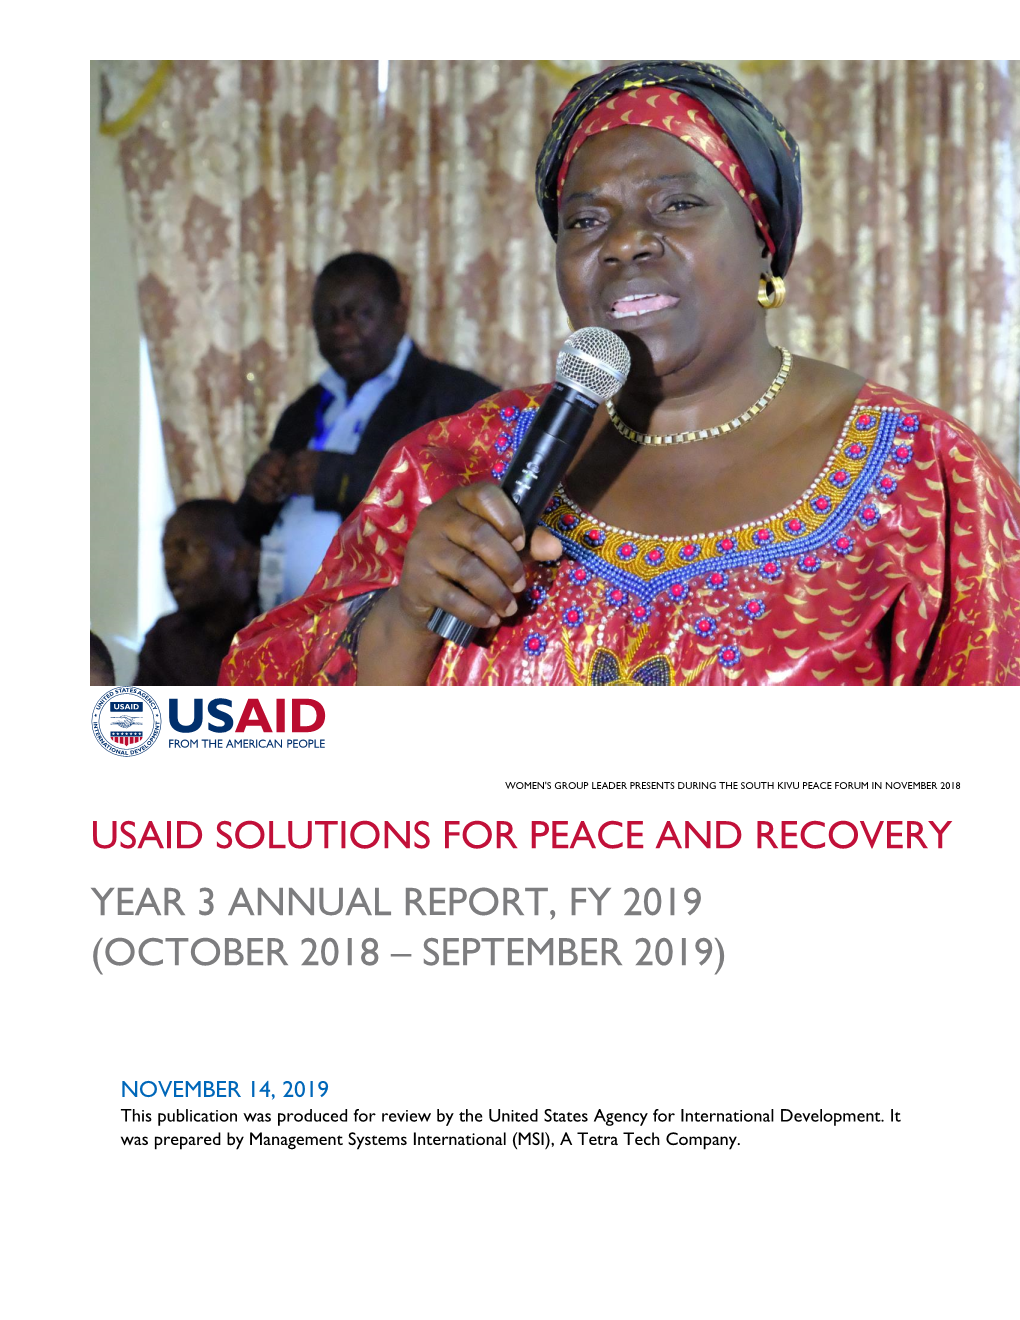 Usaid Solutions for Peace and Recovery Year 3 Annual Report, Fy 2019 (October 2018 – September 2019)